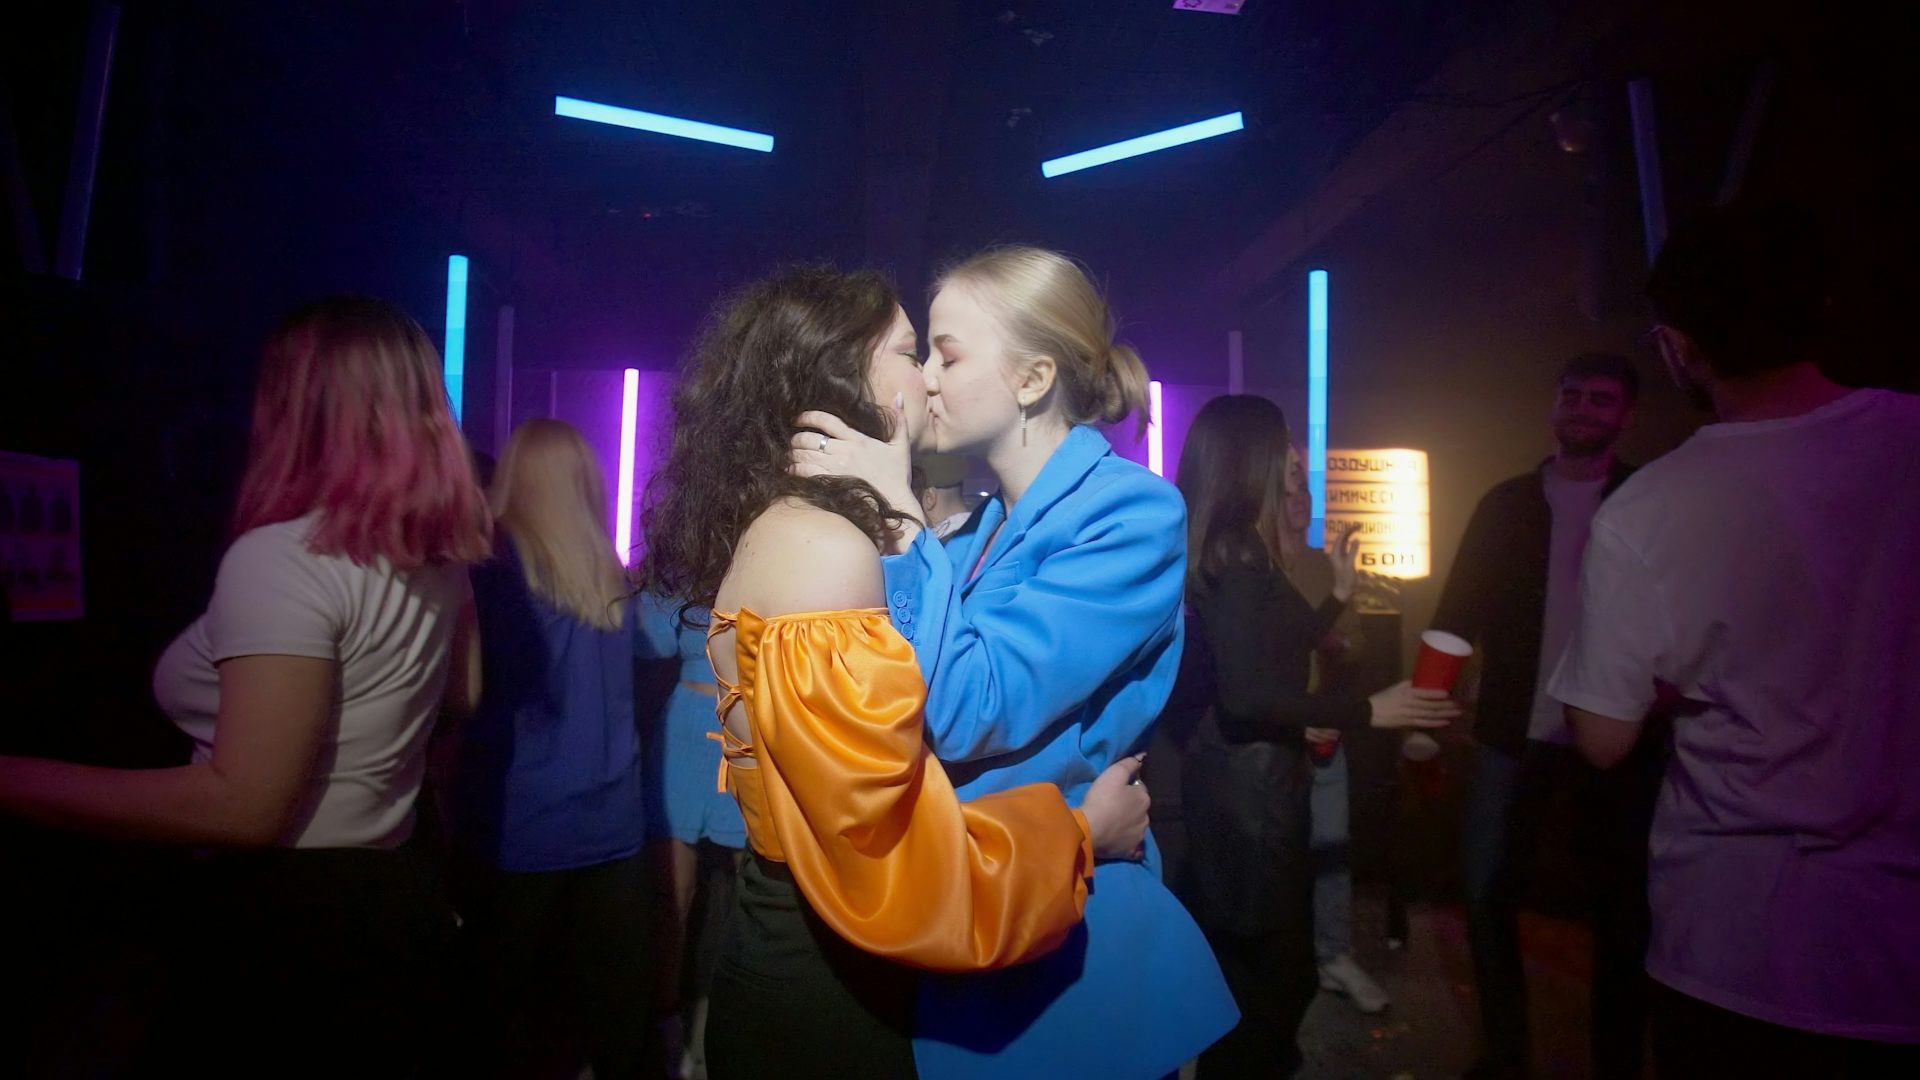 The silence around unwanted sexual attention in LGBTQ+ venues is making safe spaces less safe